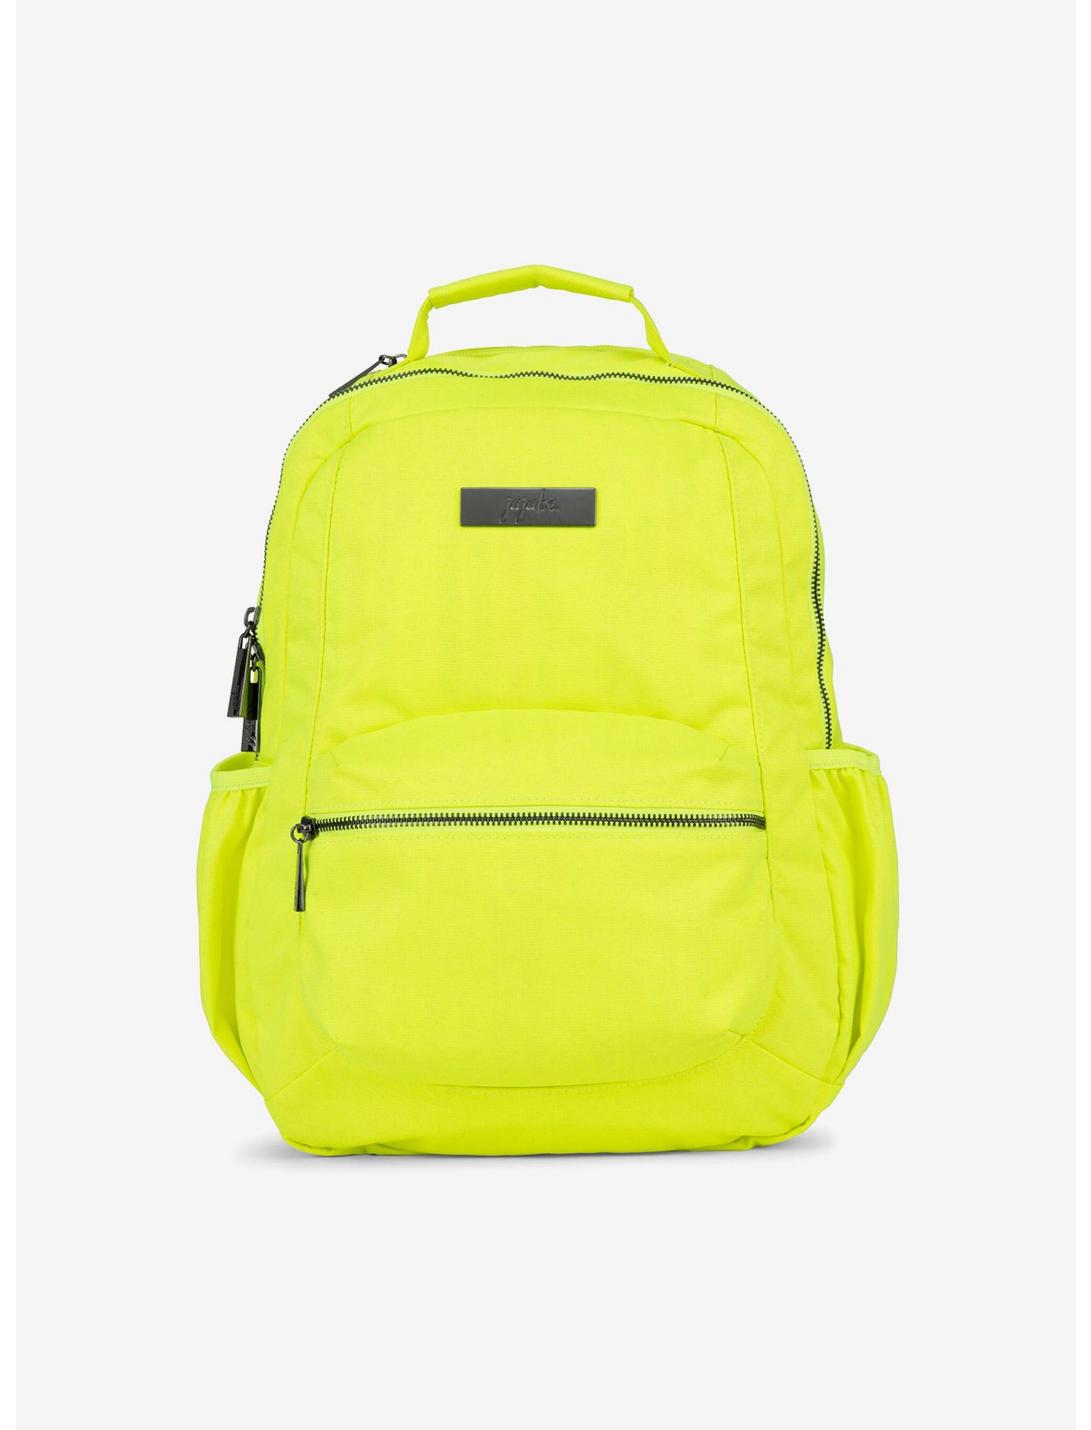 JuJuBe Be Packed Highlighter Yellow Backpack, , hi-res